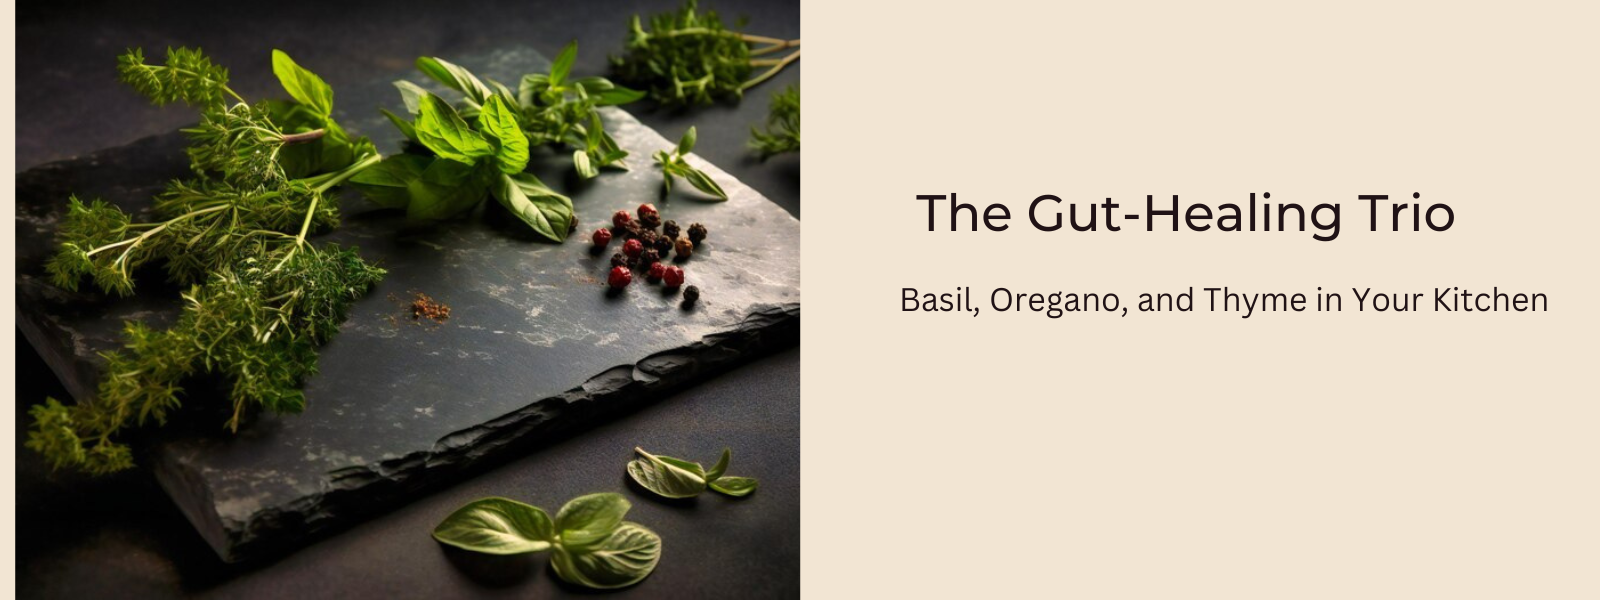 The Gut-Healing Trio: Basil, Oregano, and Thyme in Your Kitchen